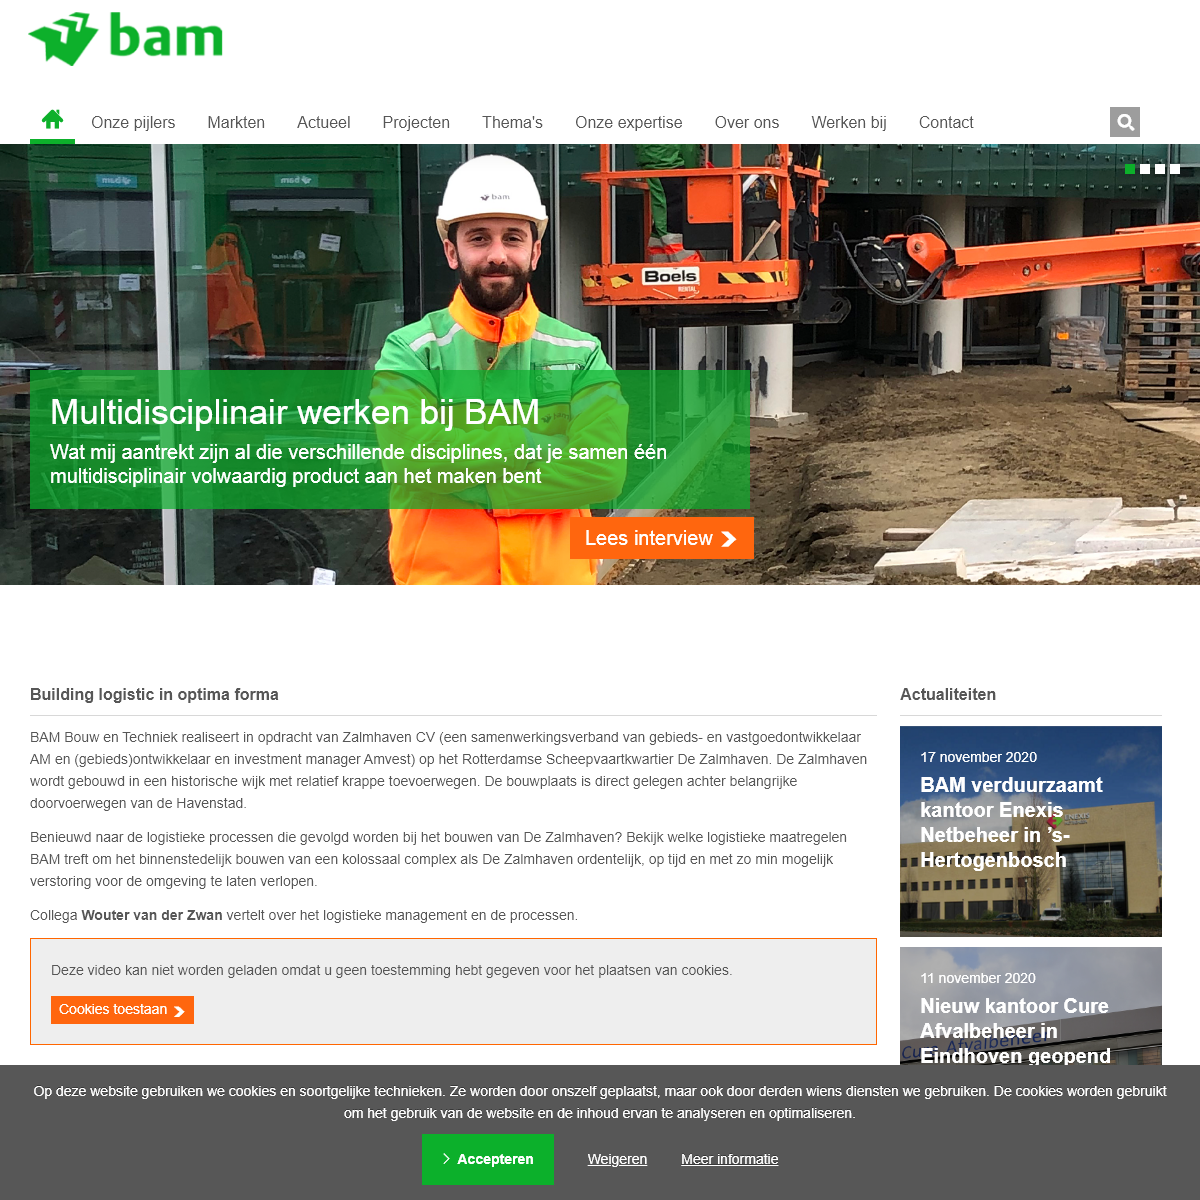 A complete backup of bambouwentechniek.nl